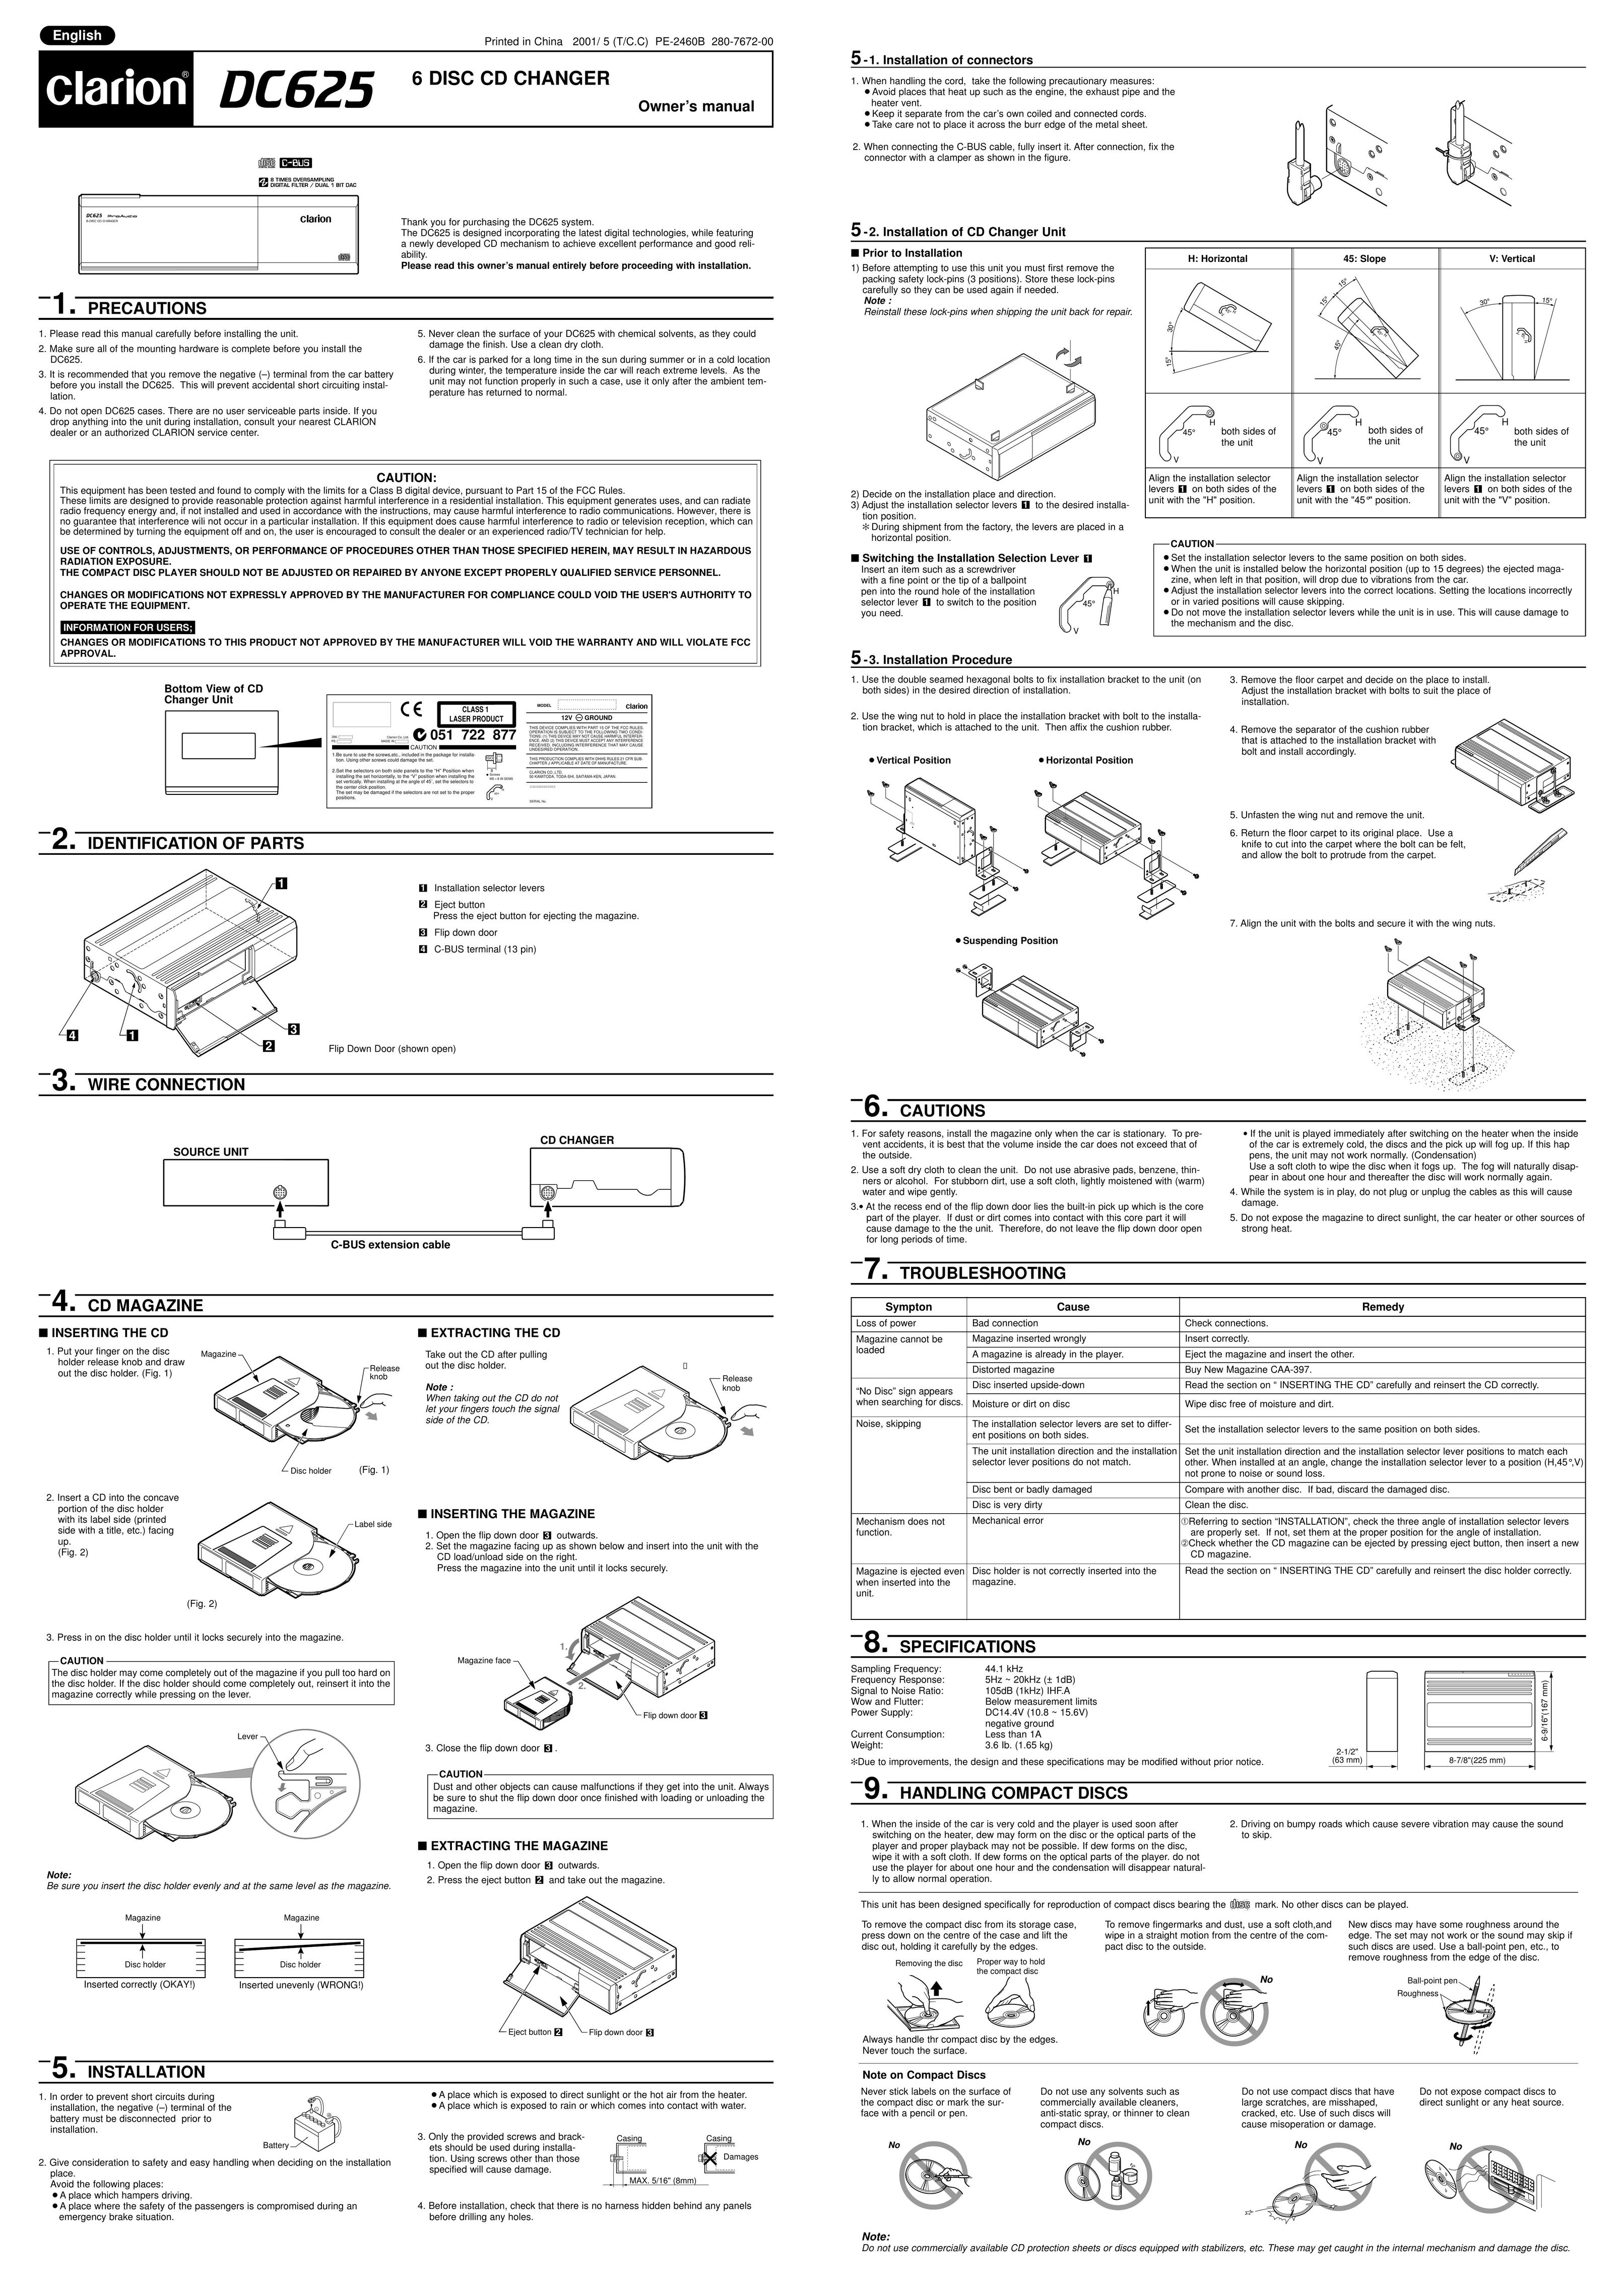 Clarion DC625 Stereo System User Manual